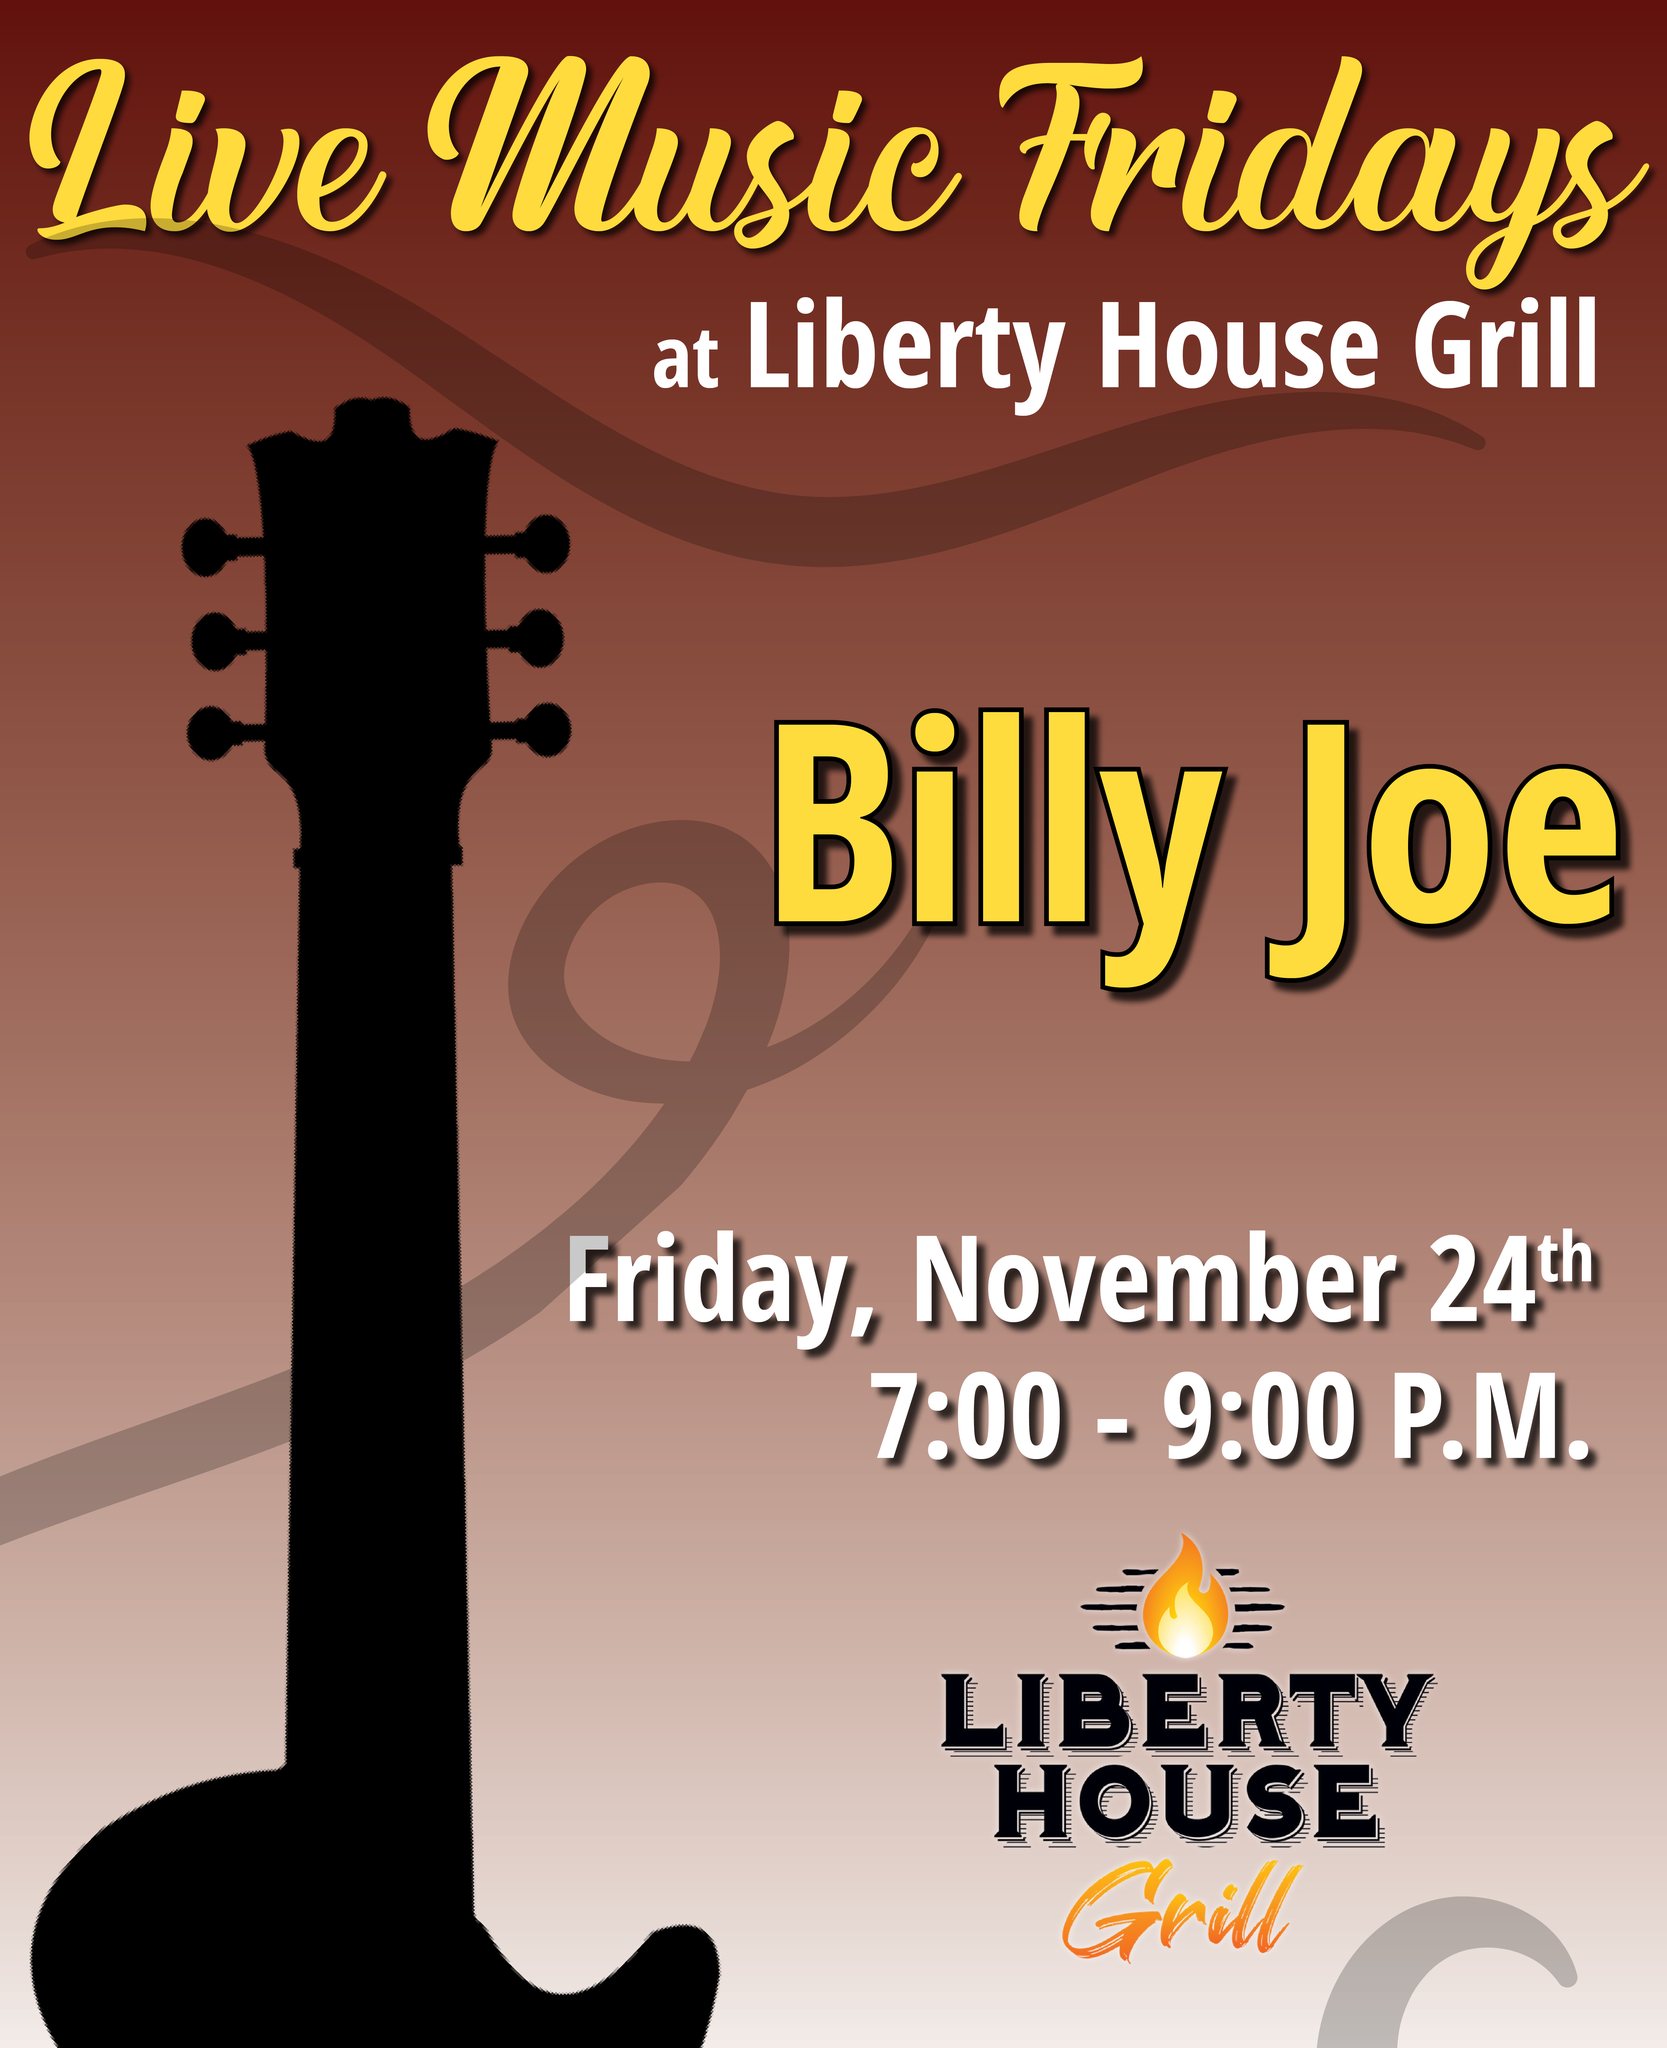 Live Music Fridays with Liberty House Grill